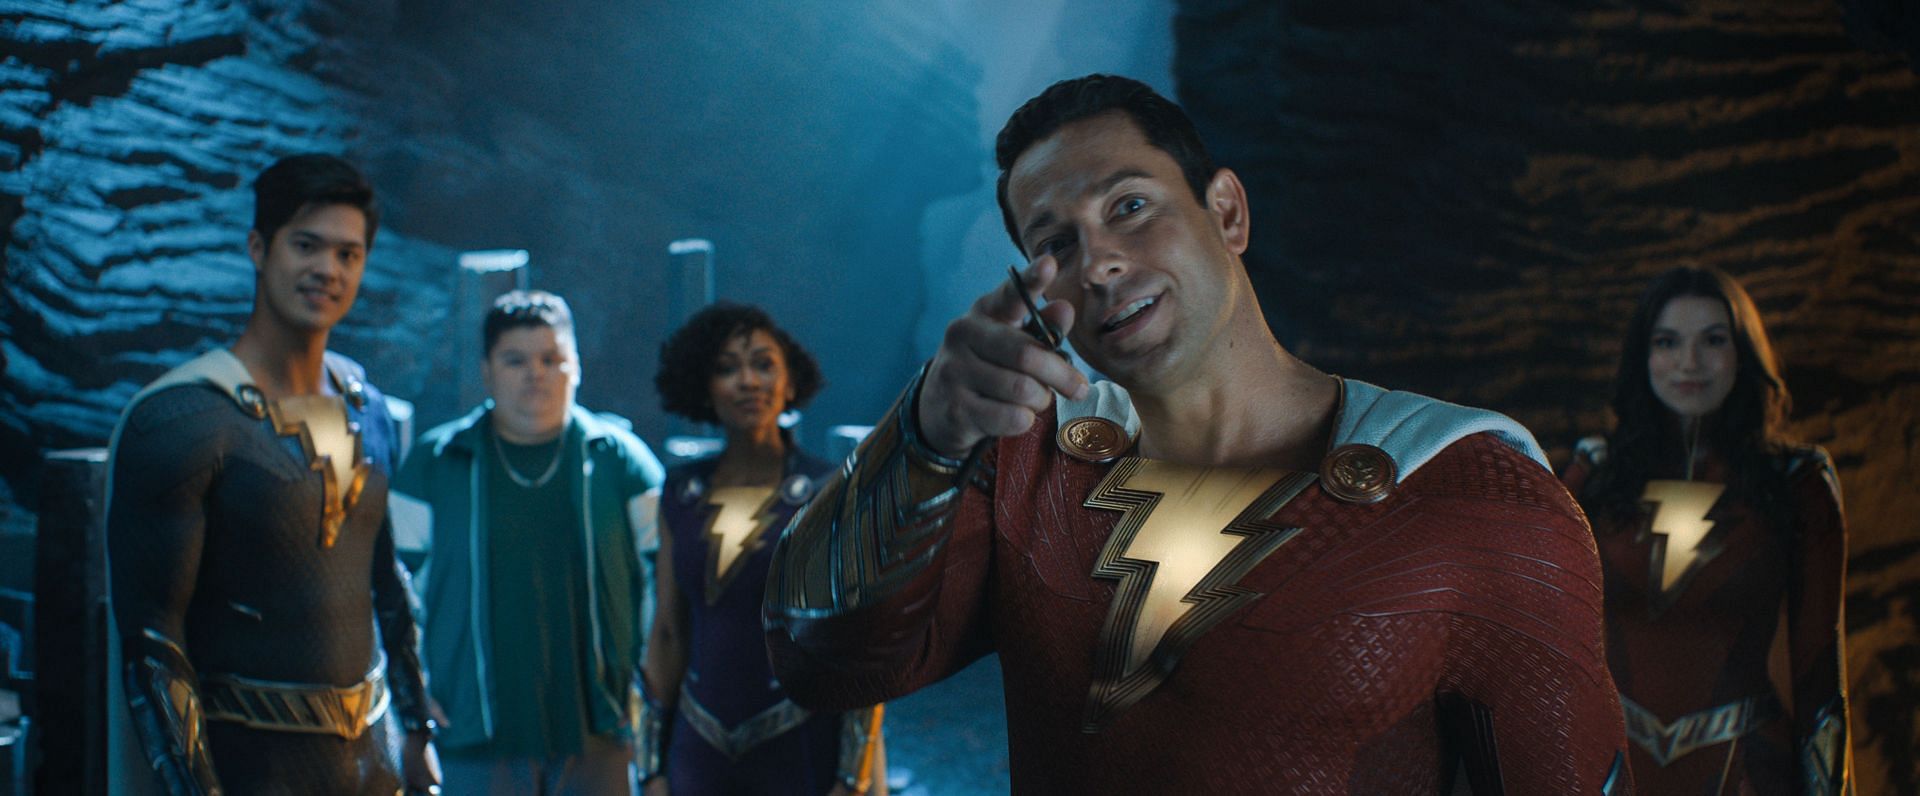 Negative word of mouth and mixed reviews impacted the box office numbers of Shazam 2 (Image via Warner Bros)